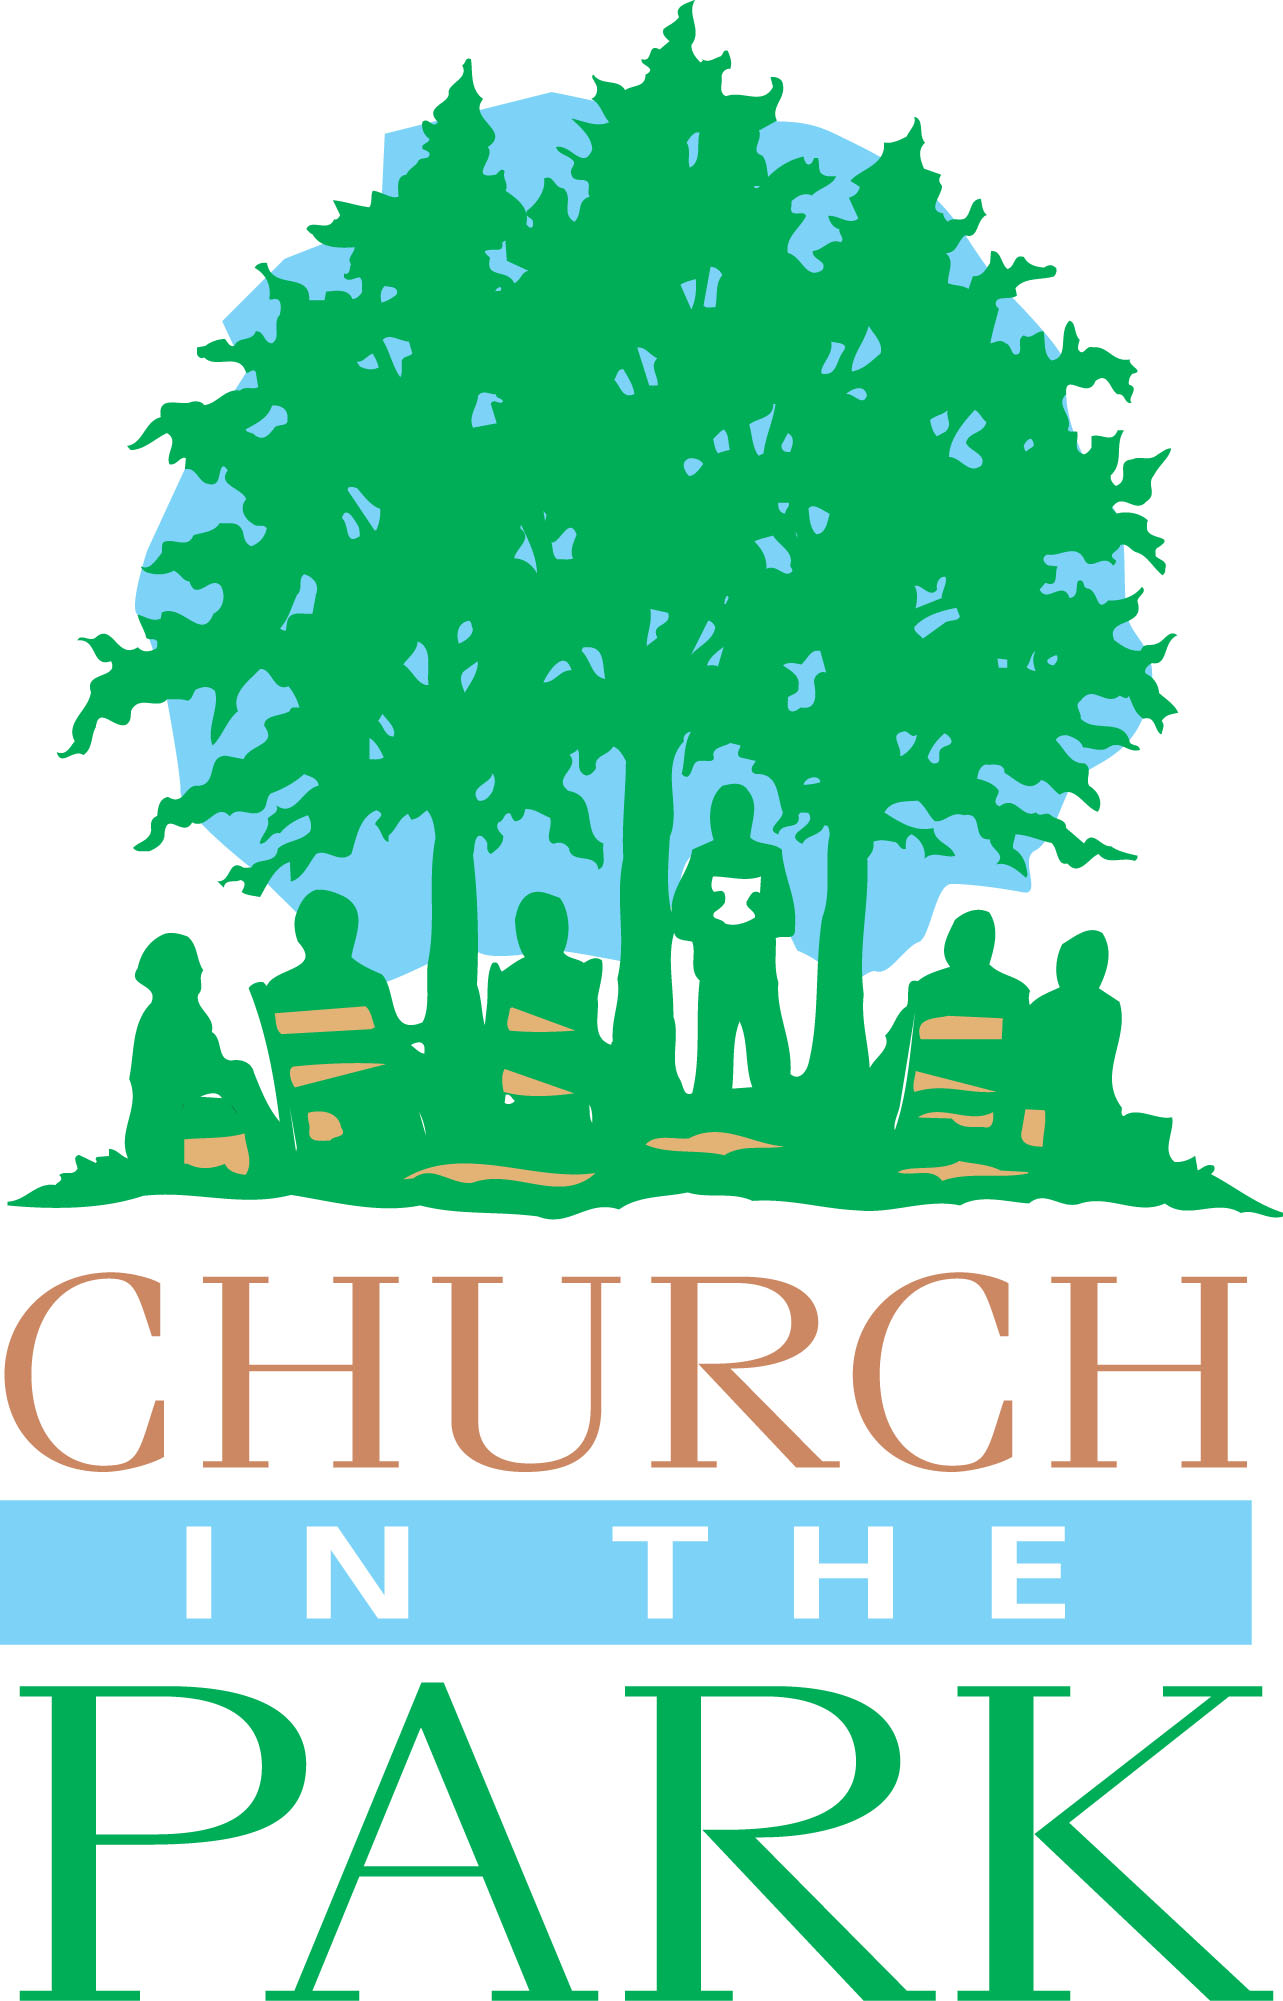 Worship in the park clipart